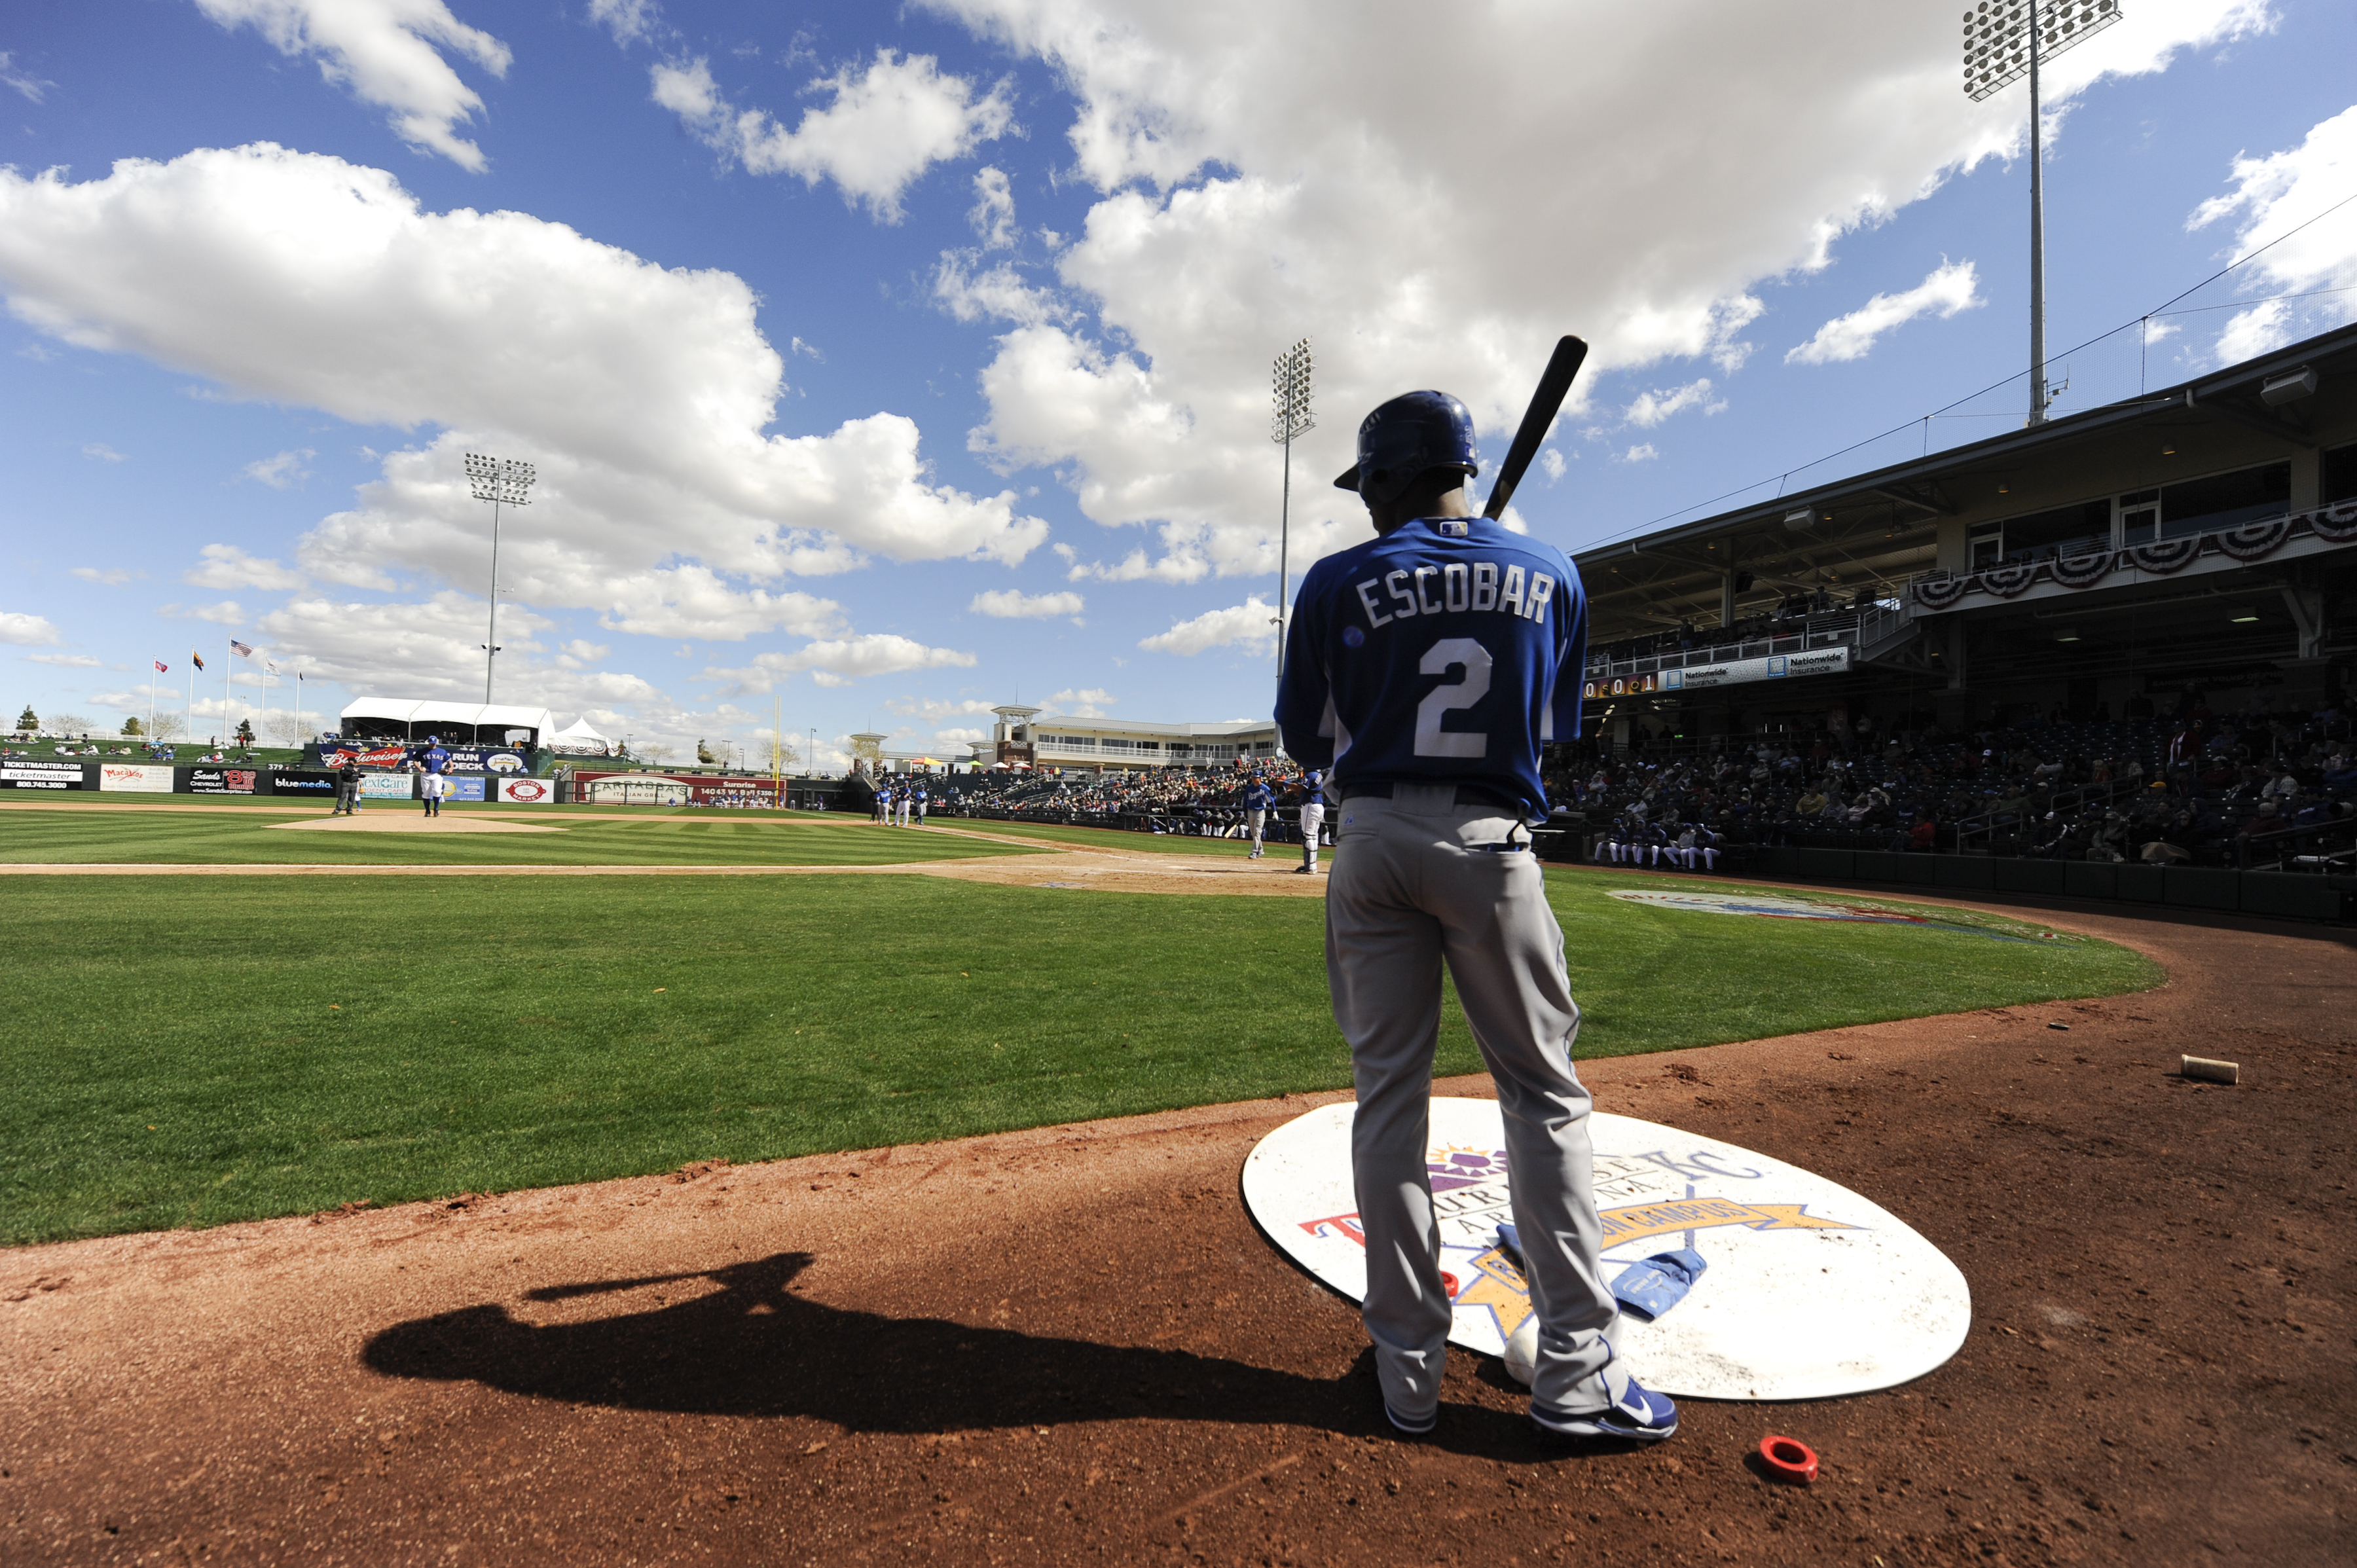 SURPISE, AZ - FEBRUARY 27: Alcides Escobar #2 of the Kansas City Royals looks on from the on deck circle during a spring training game against the Texas Rangers at Surprise Stadium on February 27, 2011 in Surprise, Arizona. (Photo by Rob Tringali/Getty Im